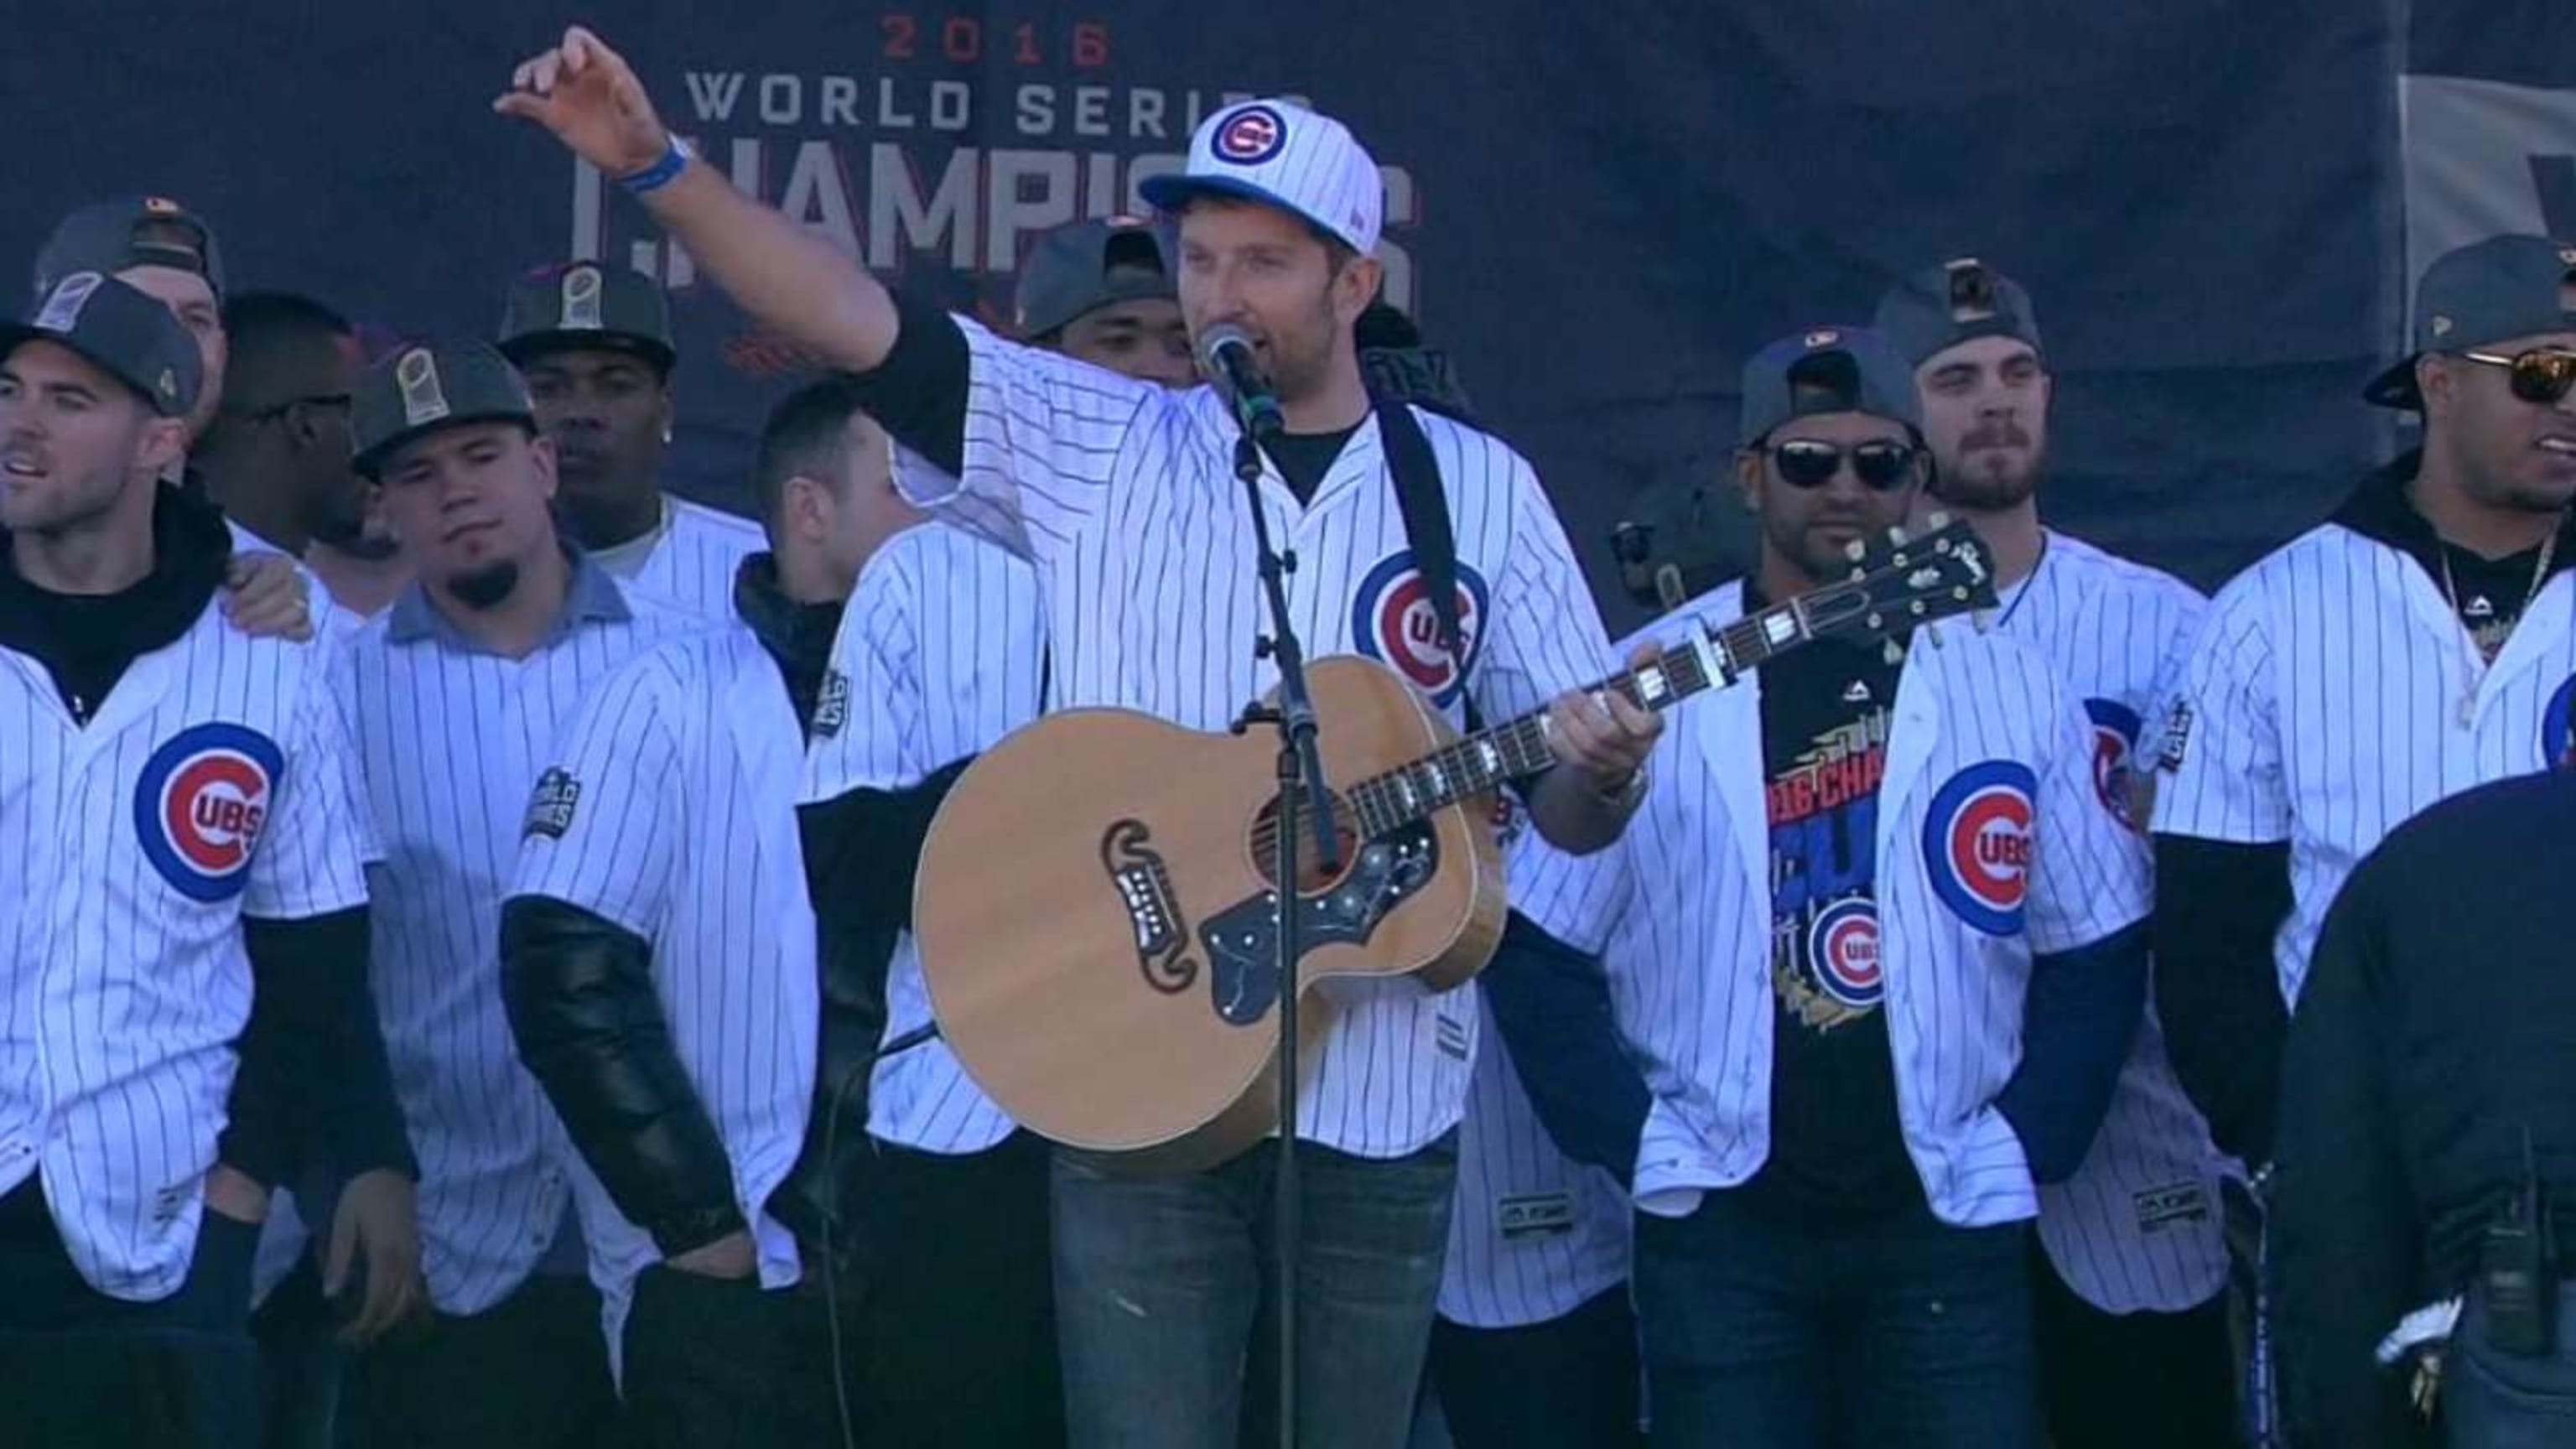 Chicago Cubs “Sing the Song” Go Cubs Go - Fly the W 